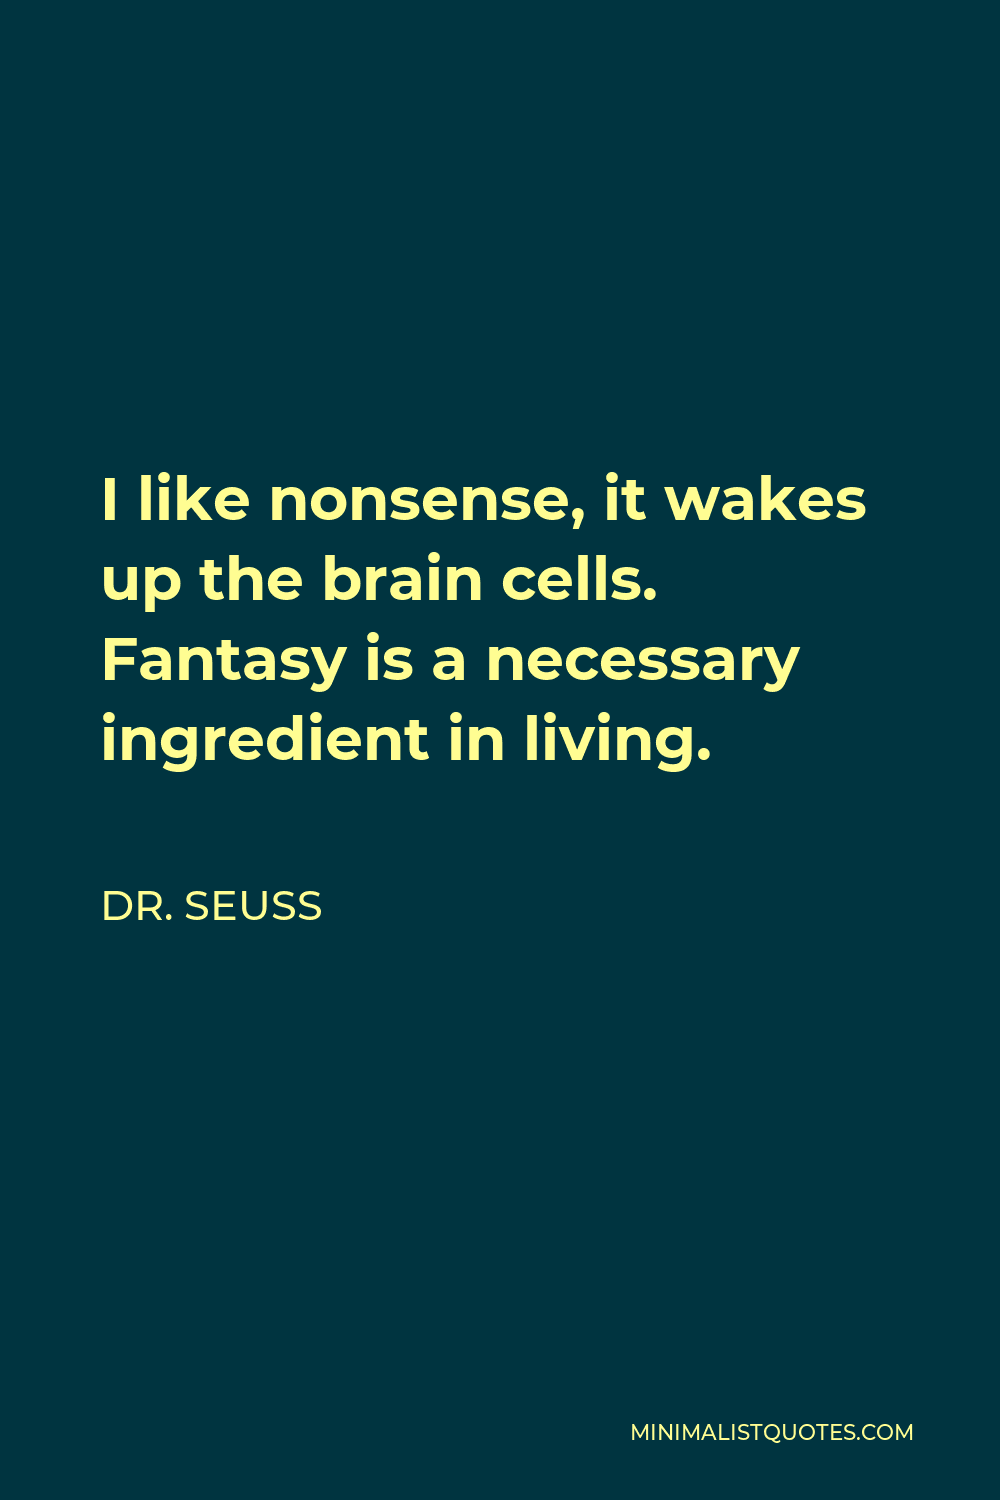 Dr. Seuss Quote - I like nonsense, it wakes up the brain cells. Fantasy is a necessary ingredient in living.